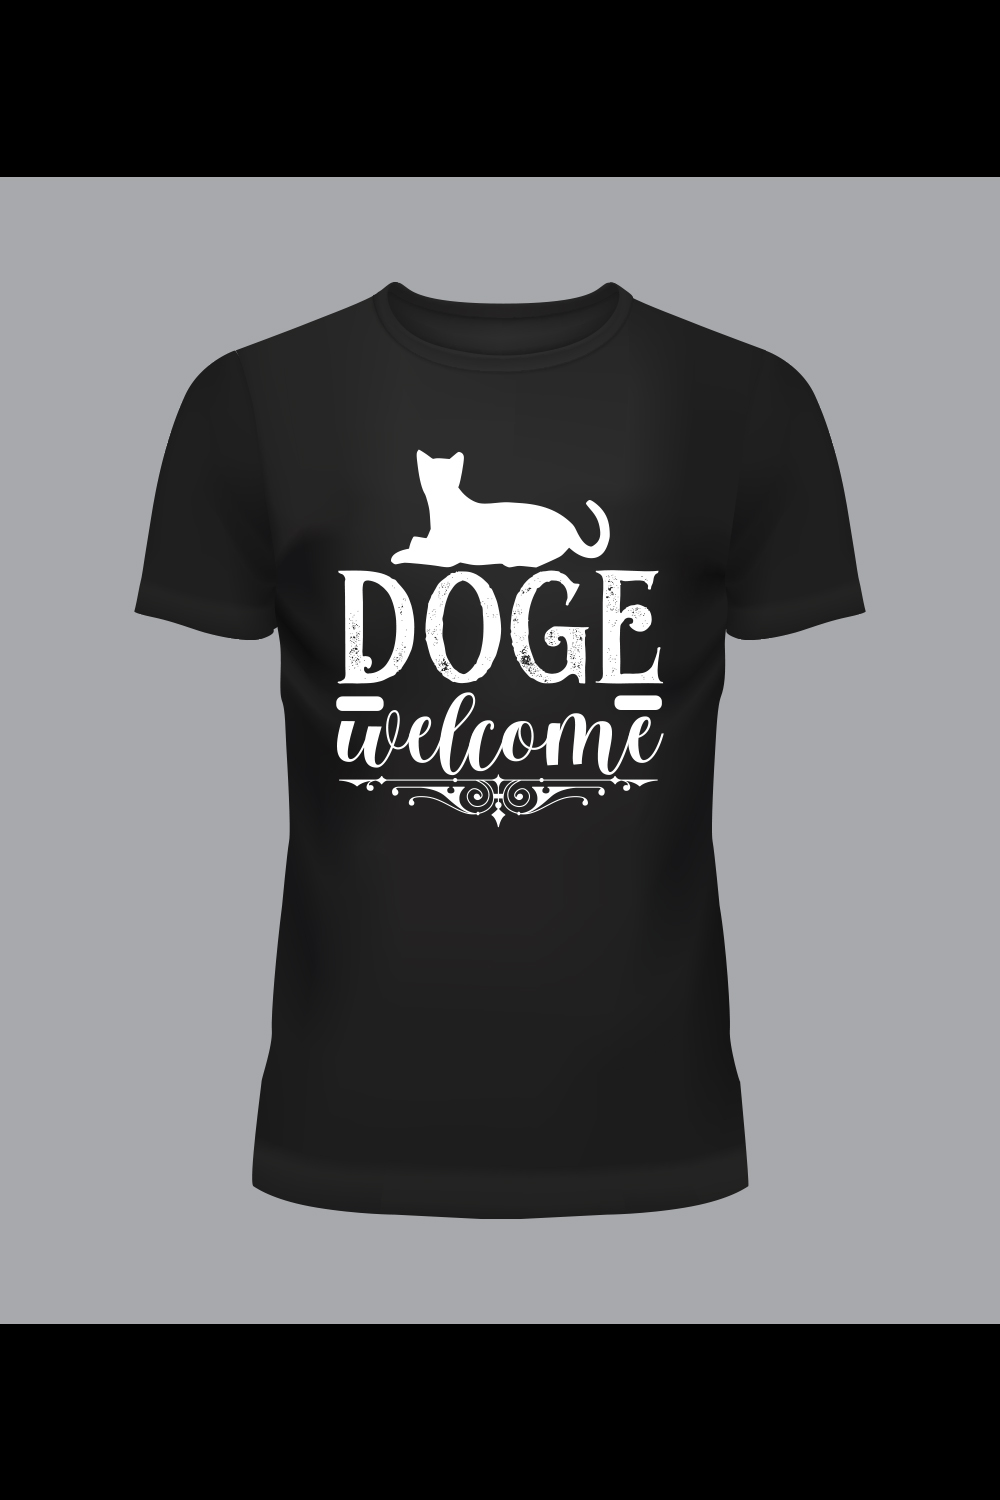 Black t - shirt with the words dog welcome.